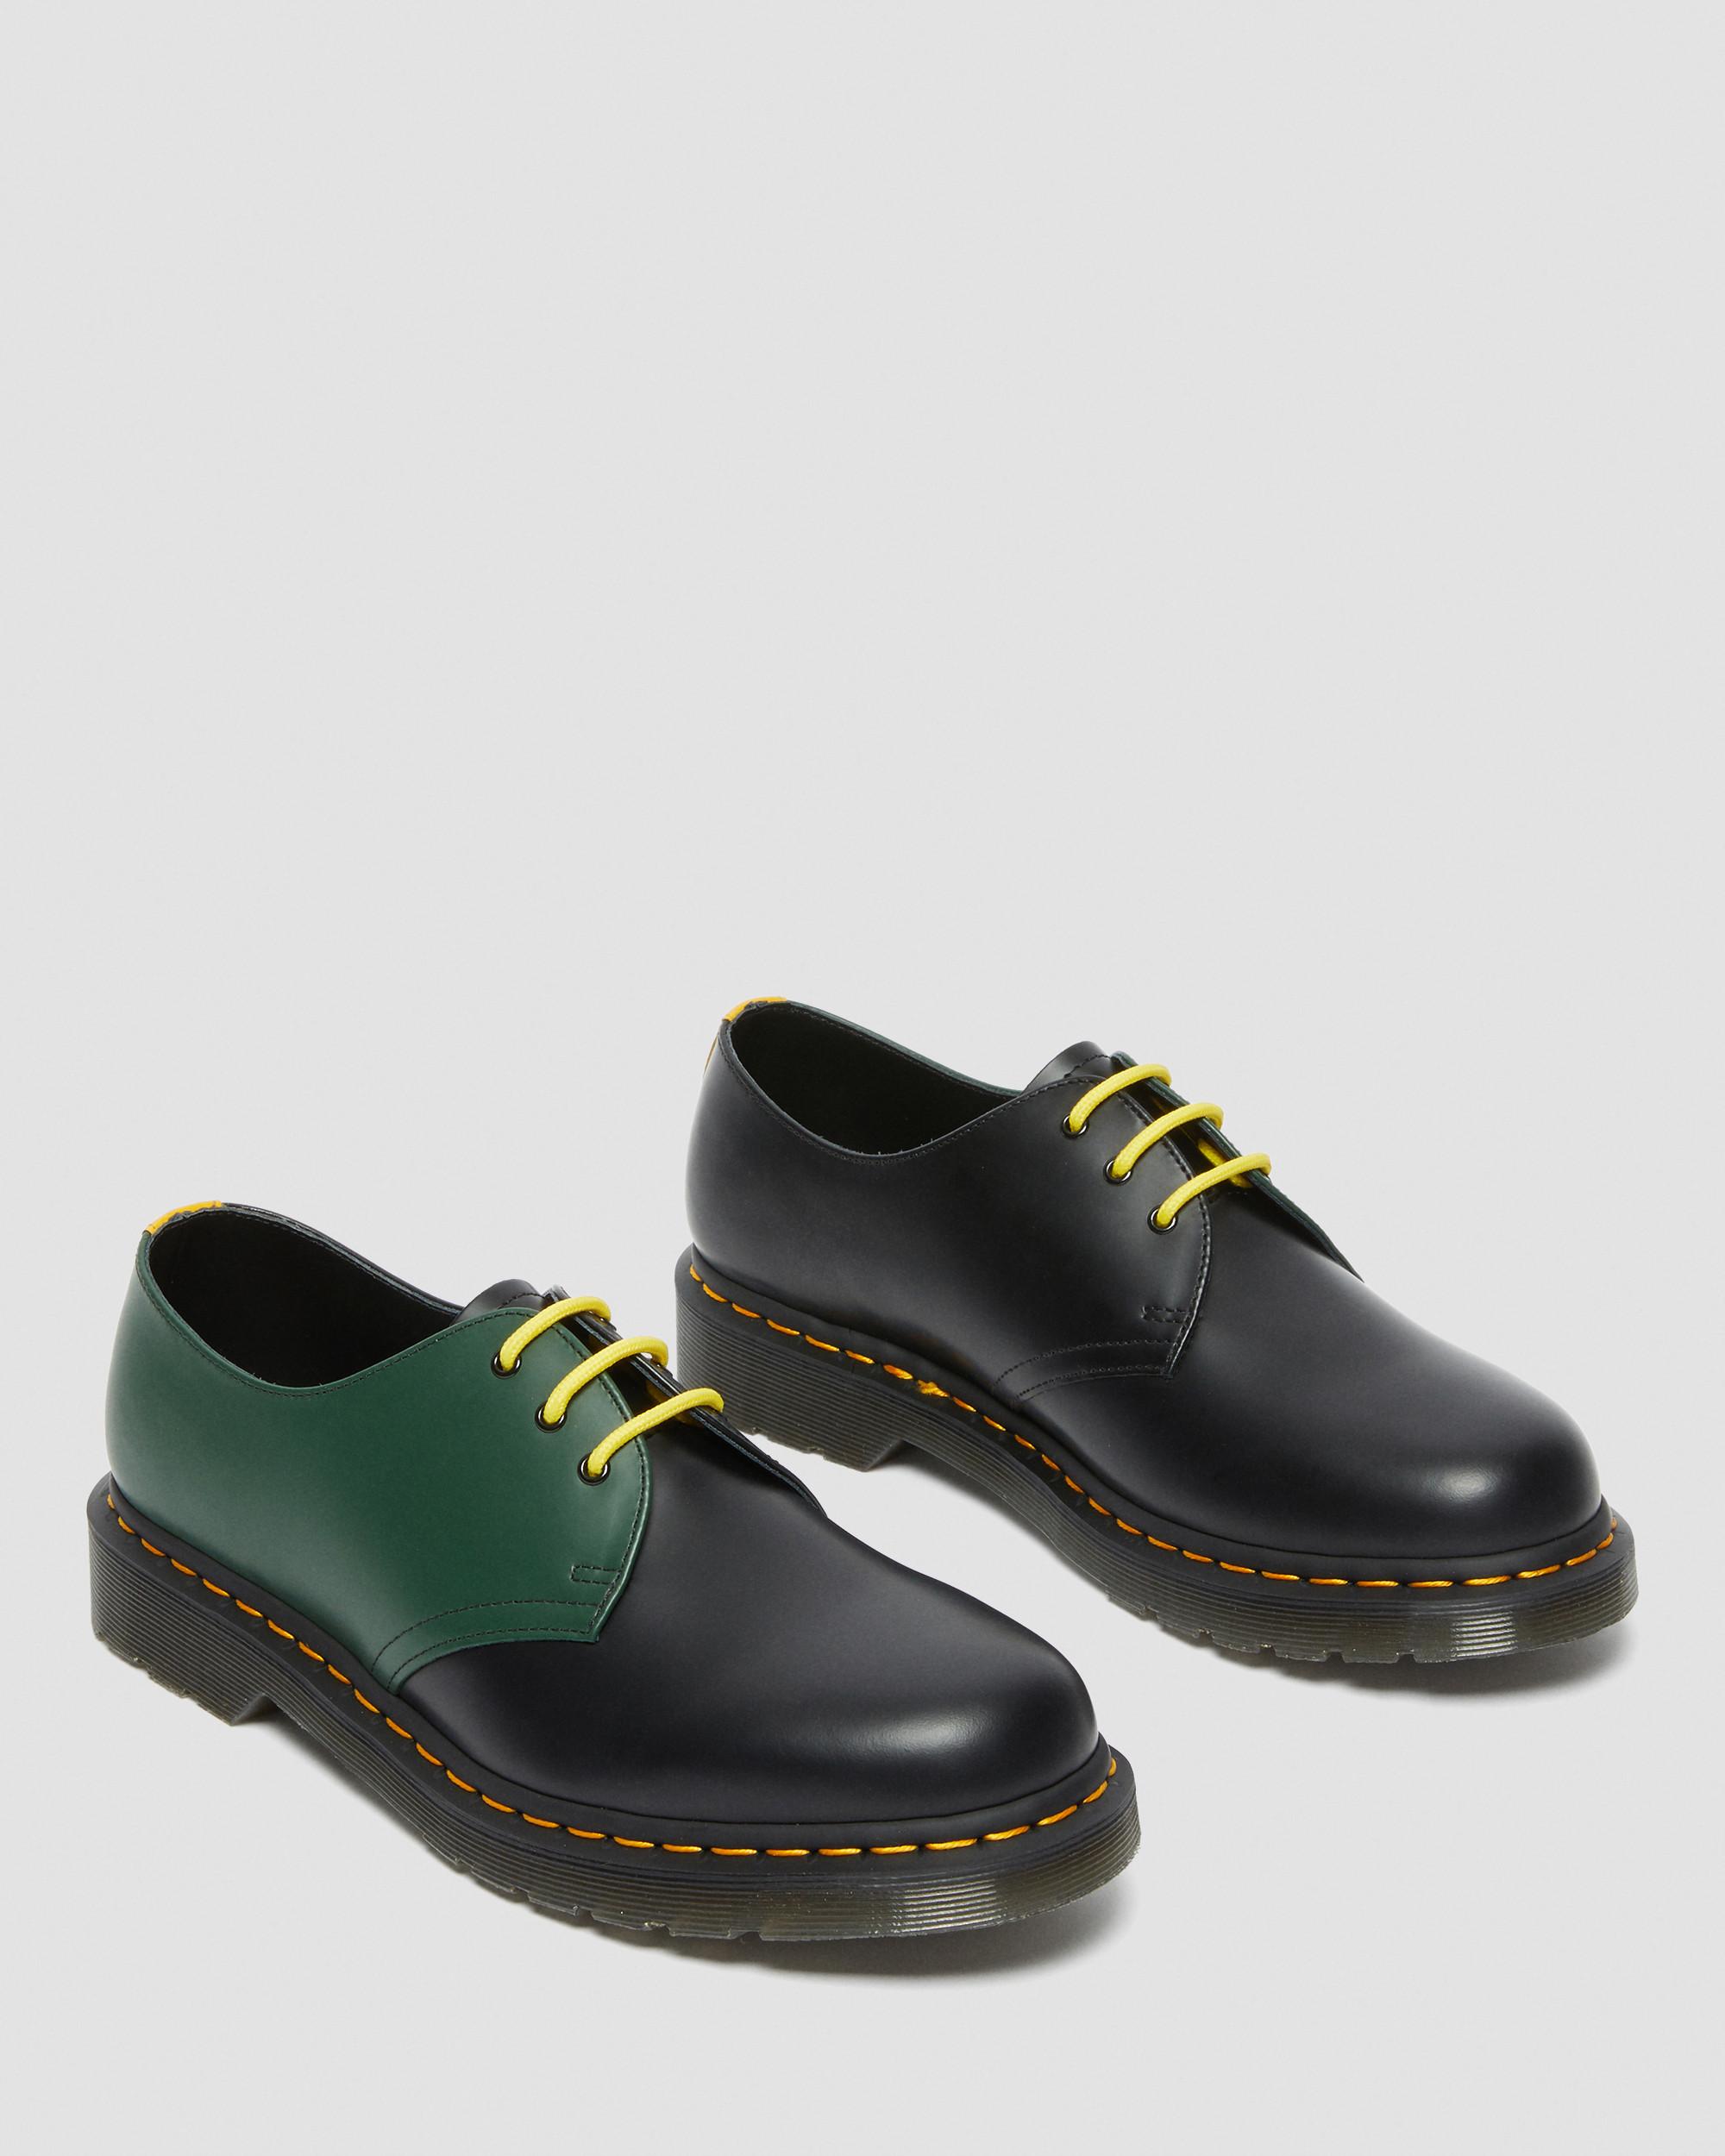 DR MARTENS 1461 Contrast Smooth Leather Oxford Shoes